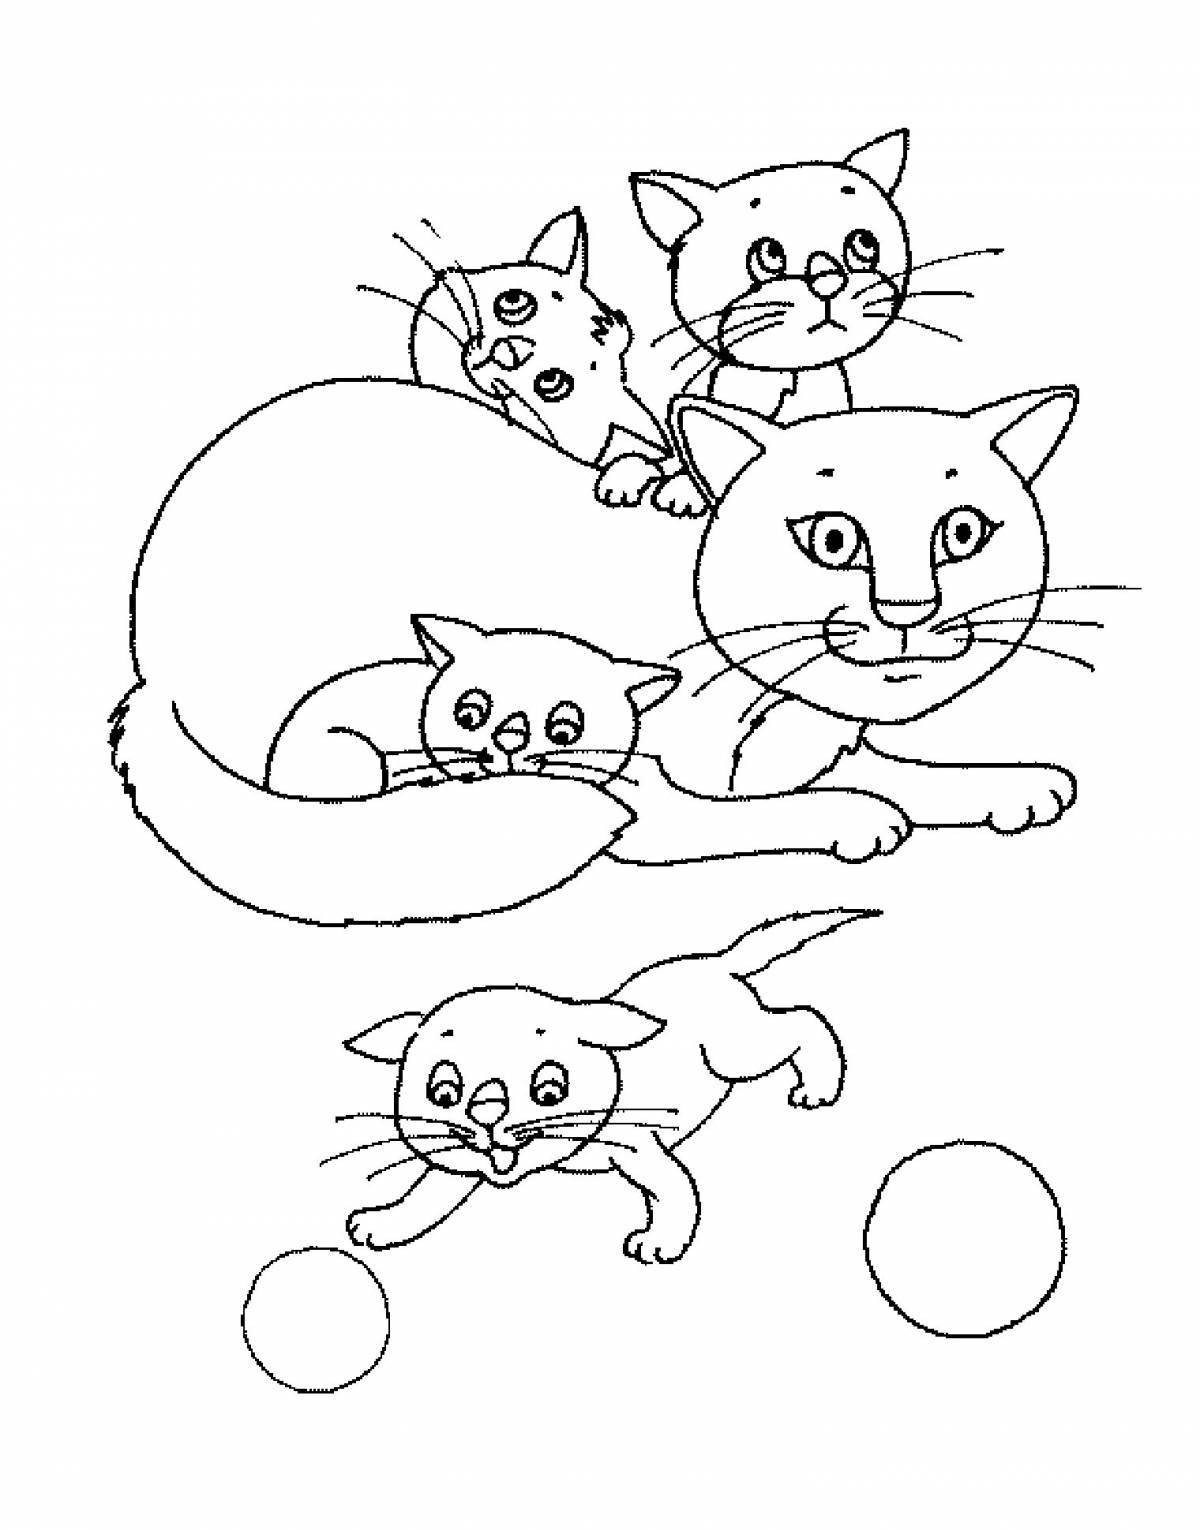 Coloring page shining mother cat